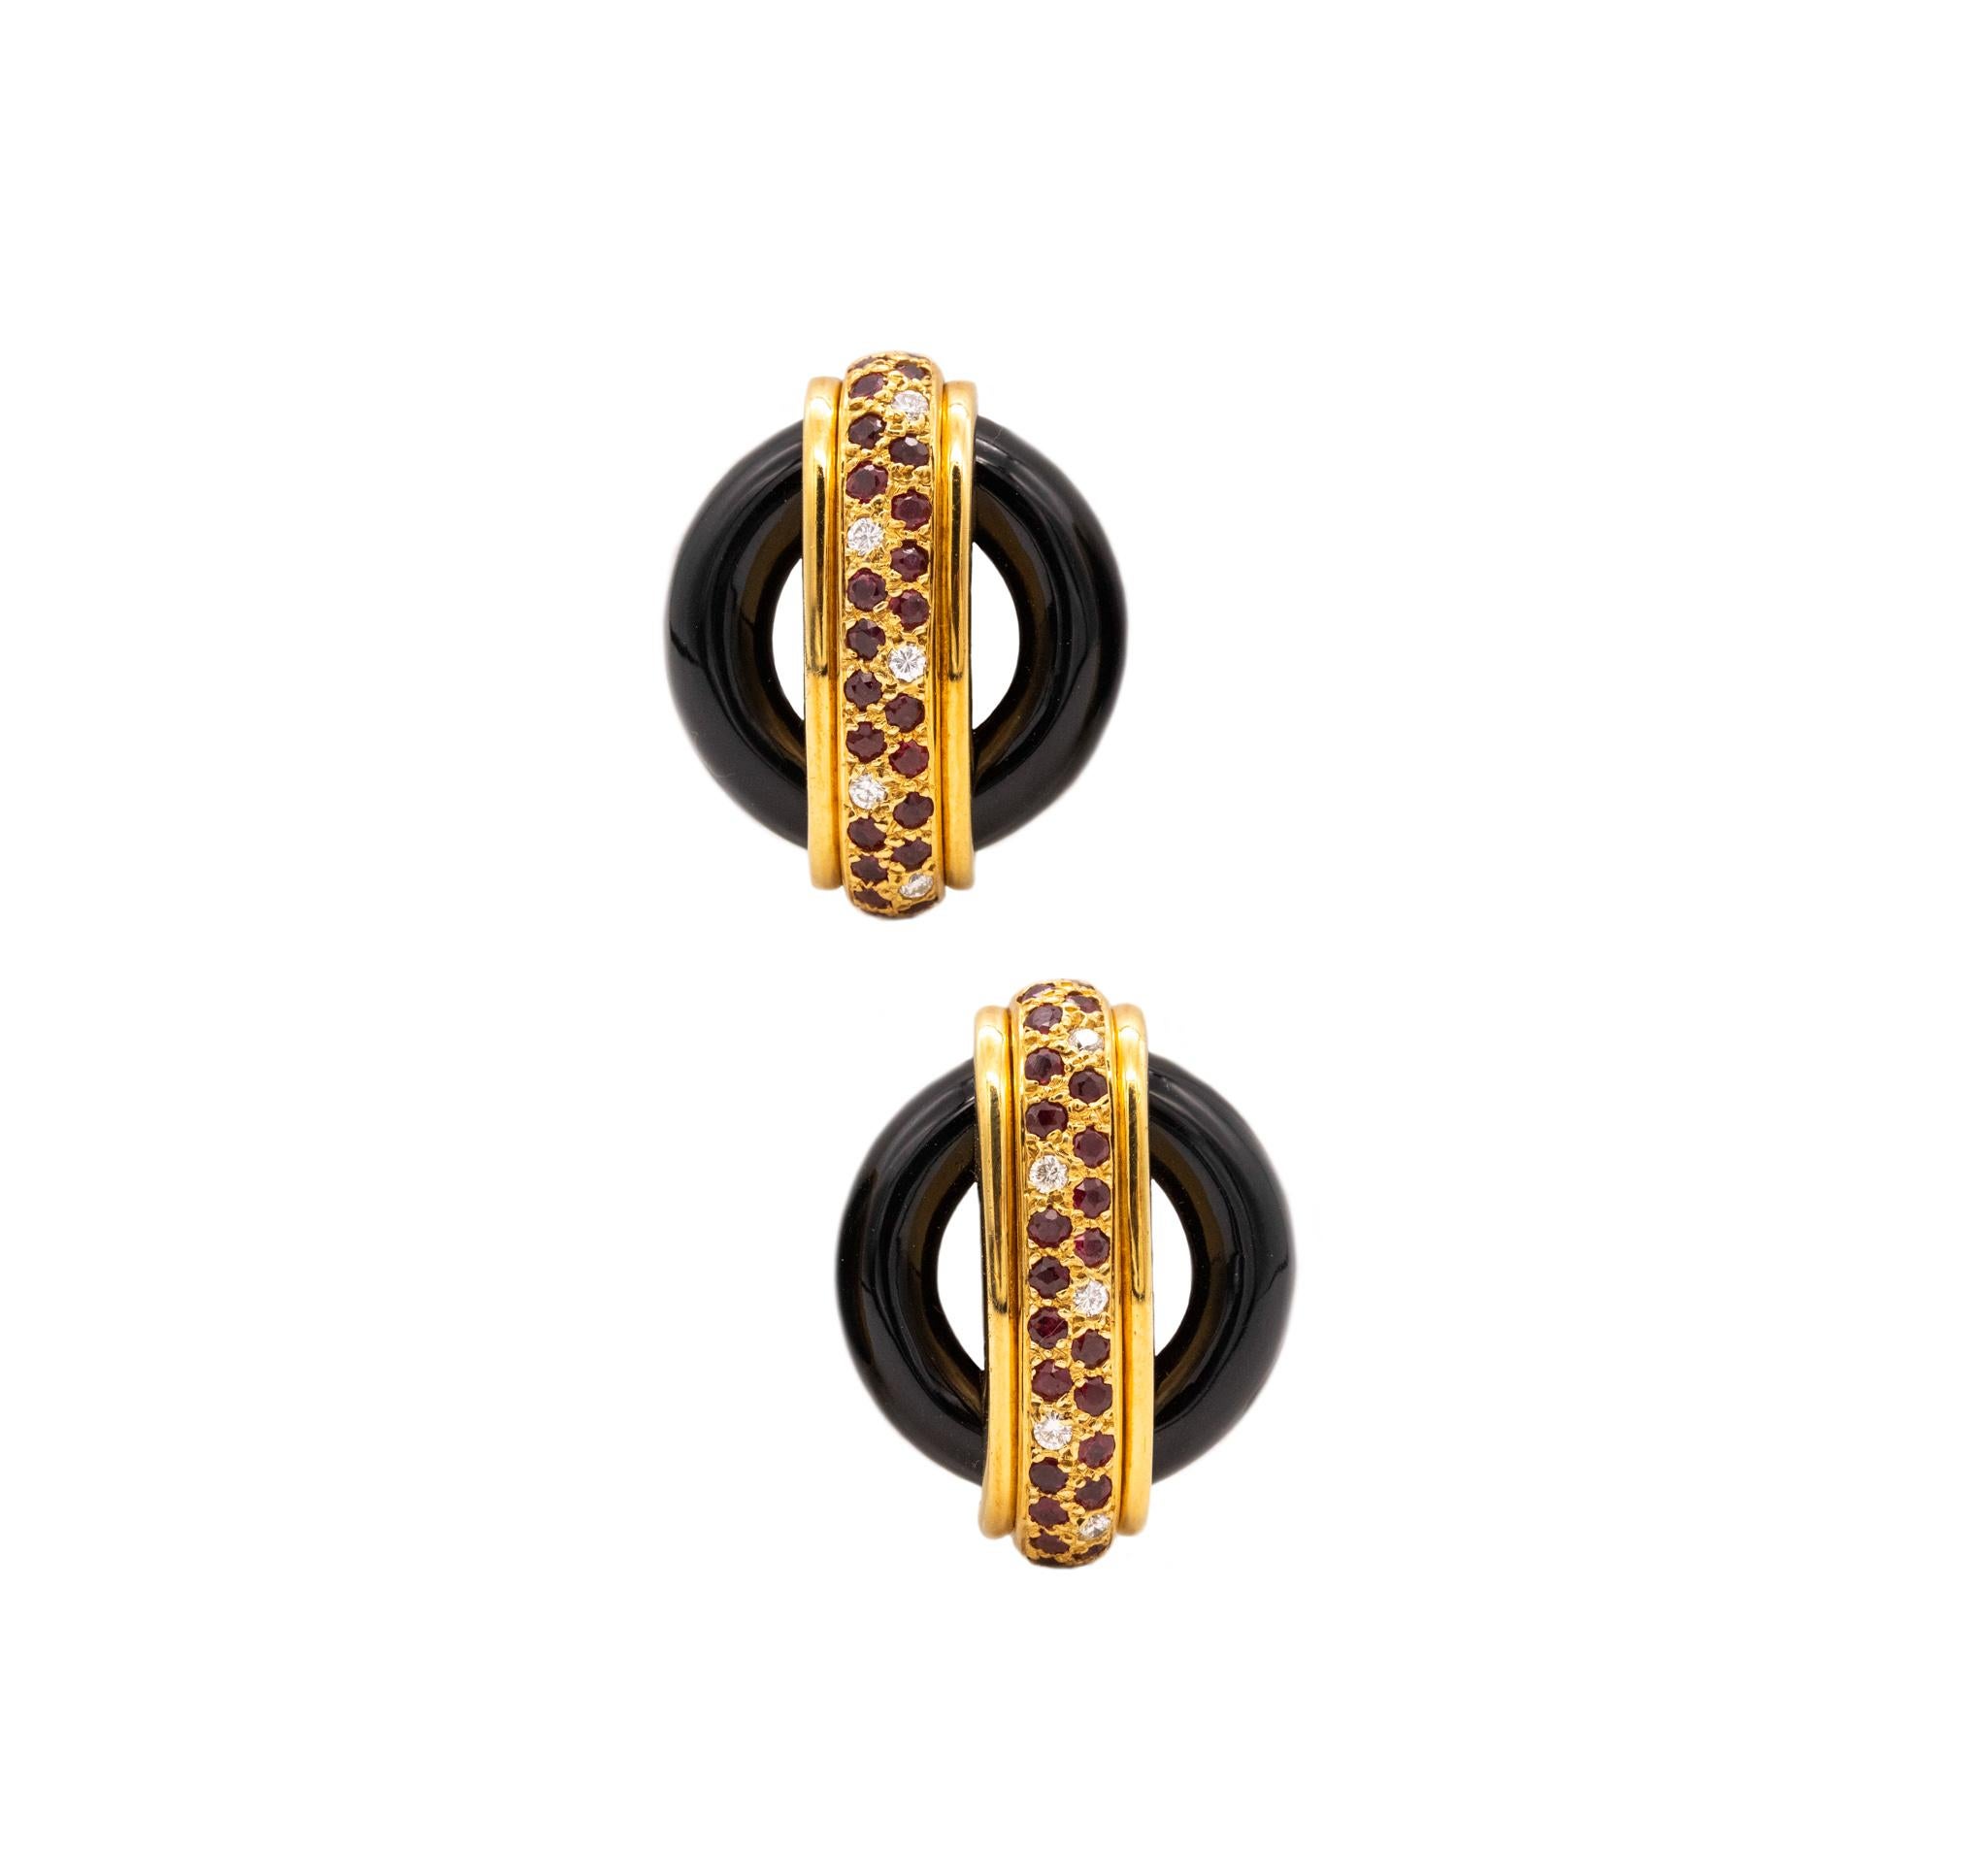 Pair of ear-clips designed by Aldo Cipullo for Cartier.

Very rare geometric round pieces created in 1974, in the city of New York by Aldo Cipullo, during his collaboration period with the house of Cartier (1969-1975) as a designer.

This pair is